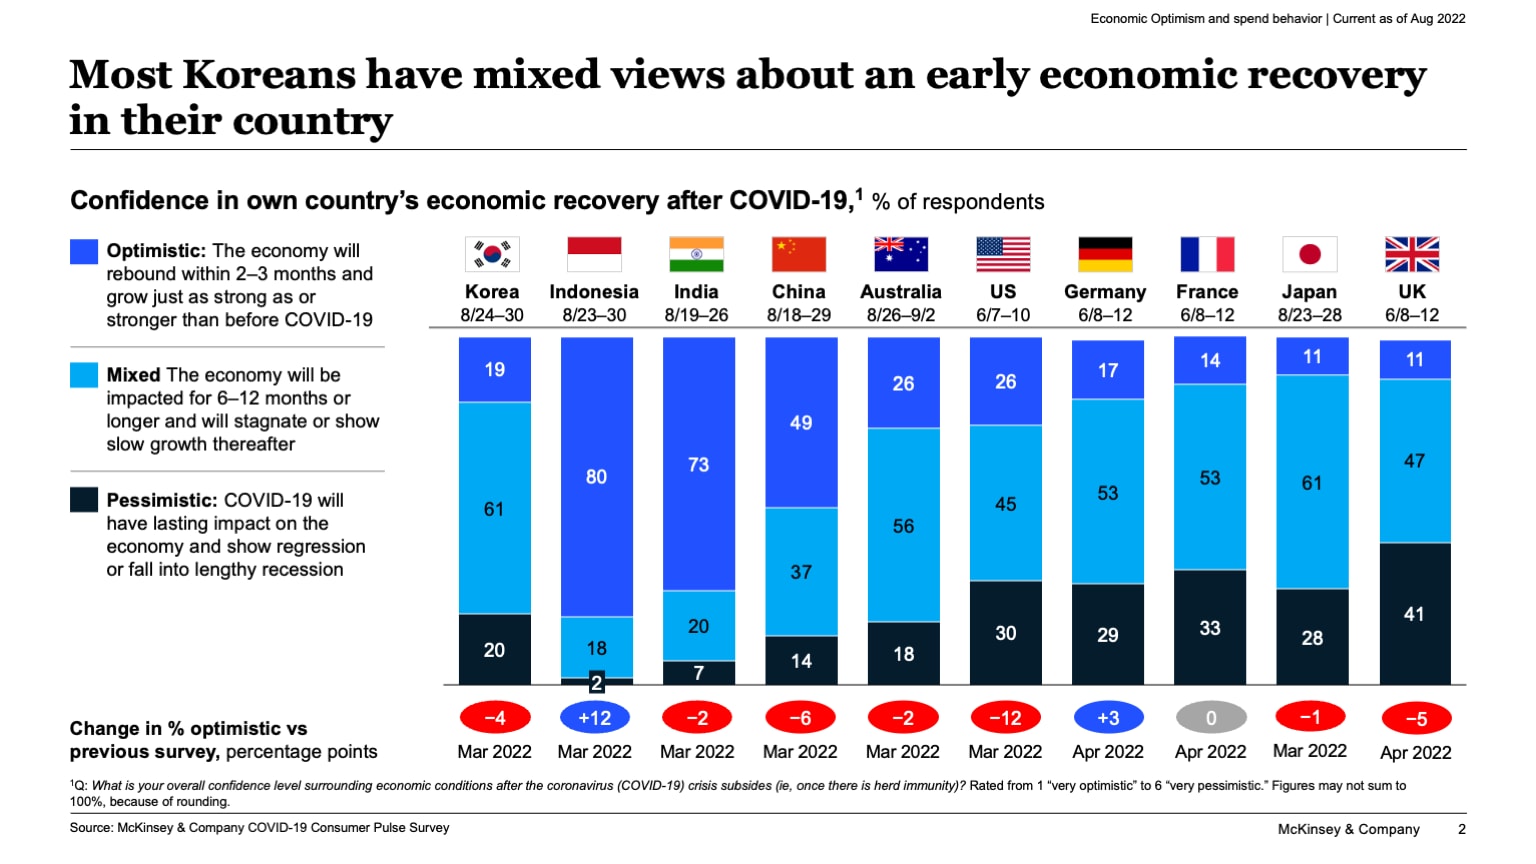 Most Koreans have mixed views about an early economic recovery in their country